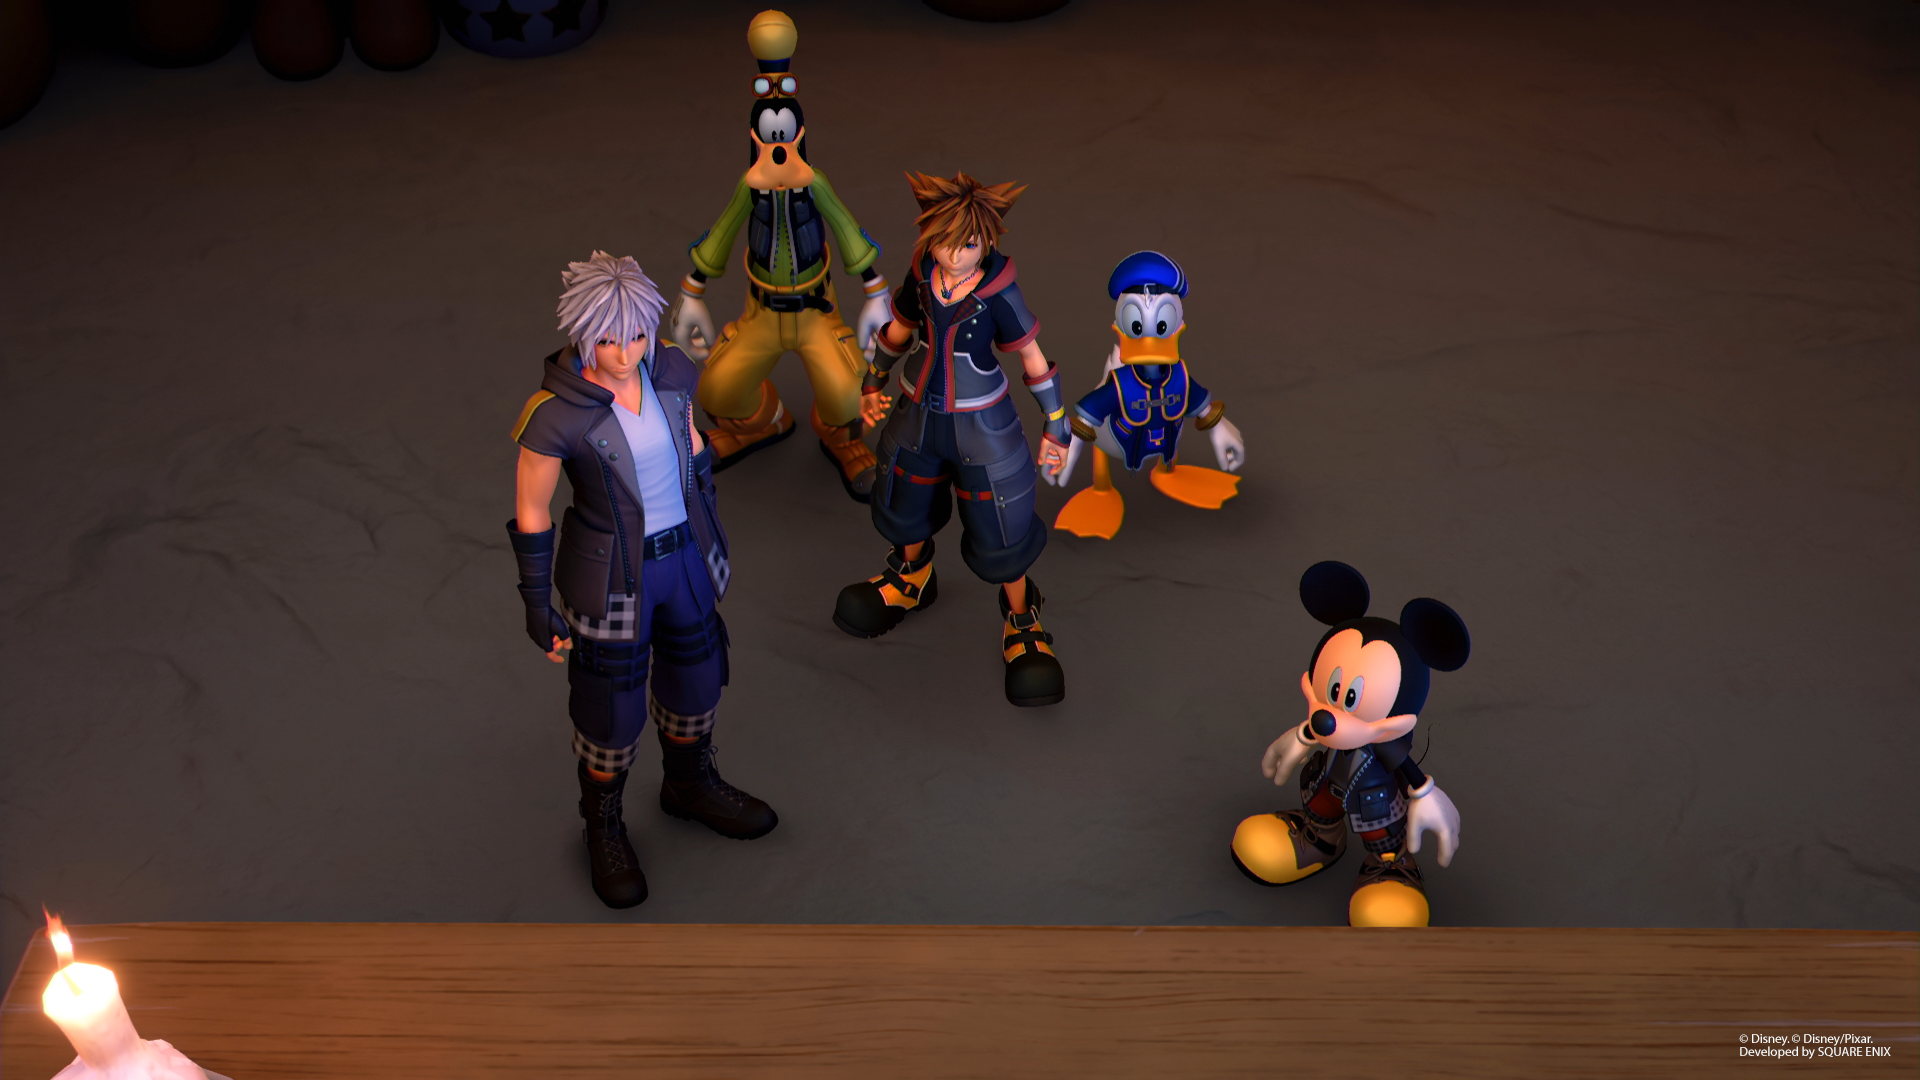 Kingdom Hearts III Review - A Main Attraction Worth Waiting For